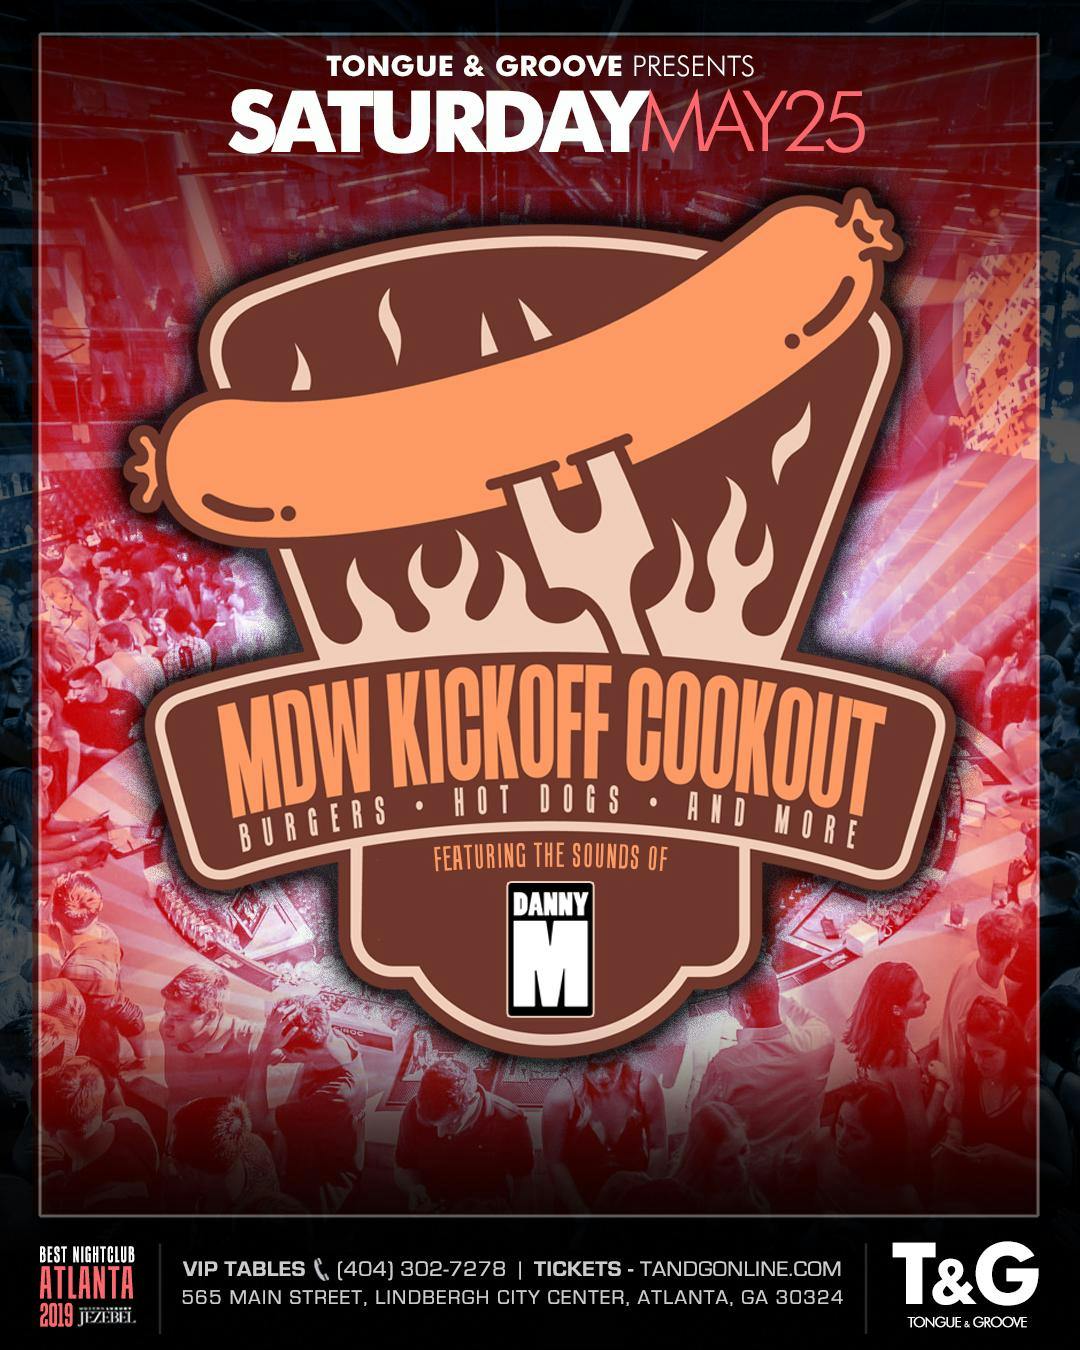 Memorial Day Weekend Party and Cookout at Tongue and Groove